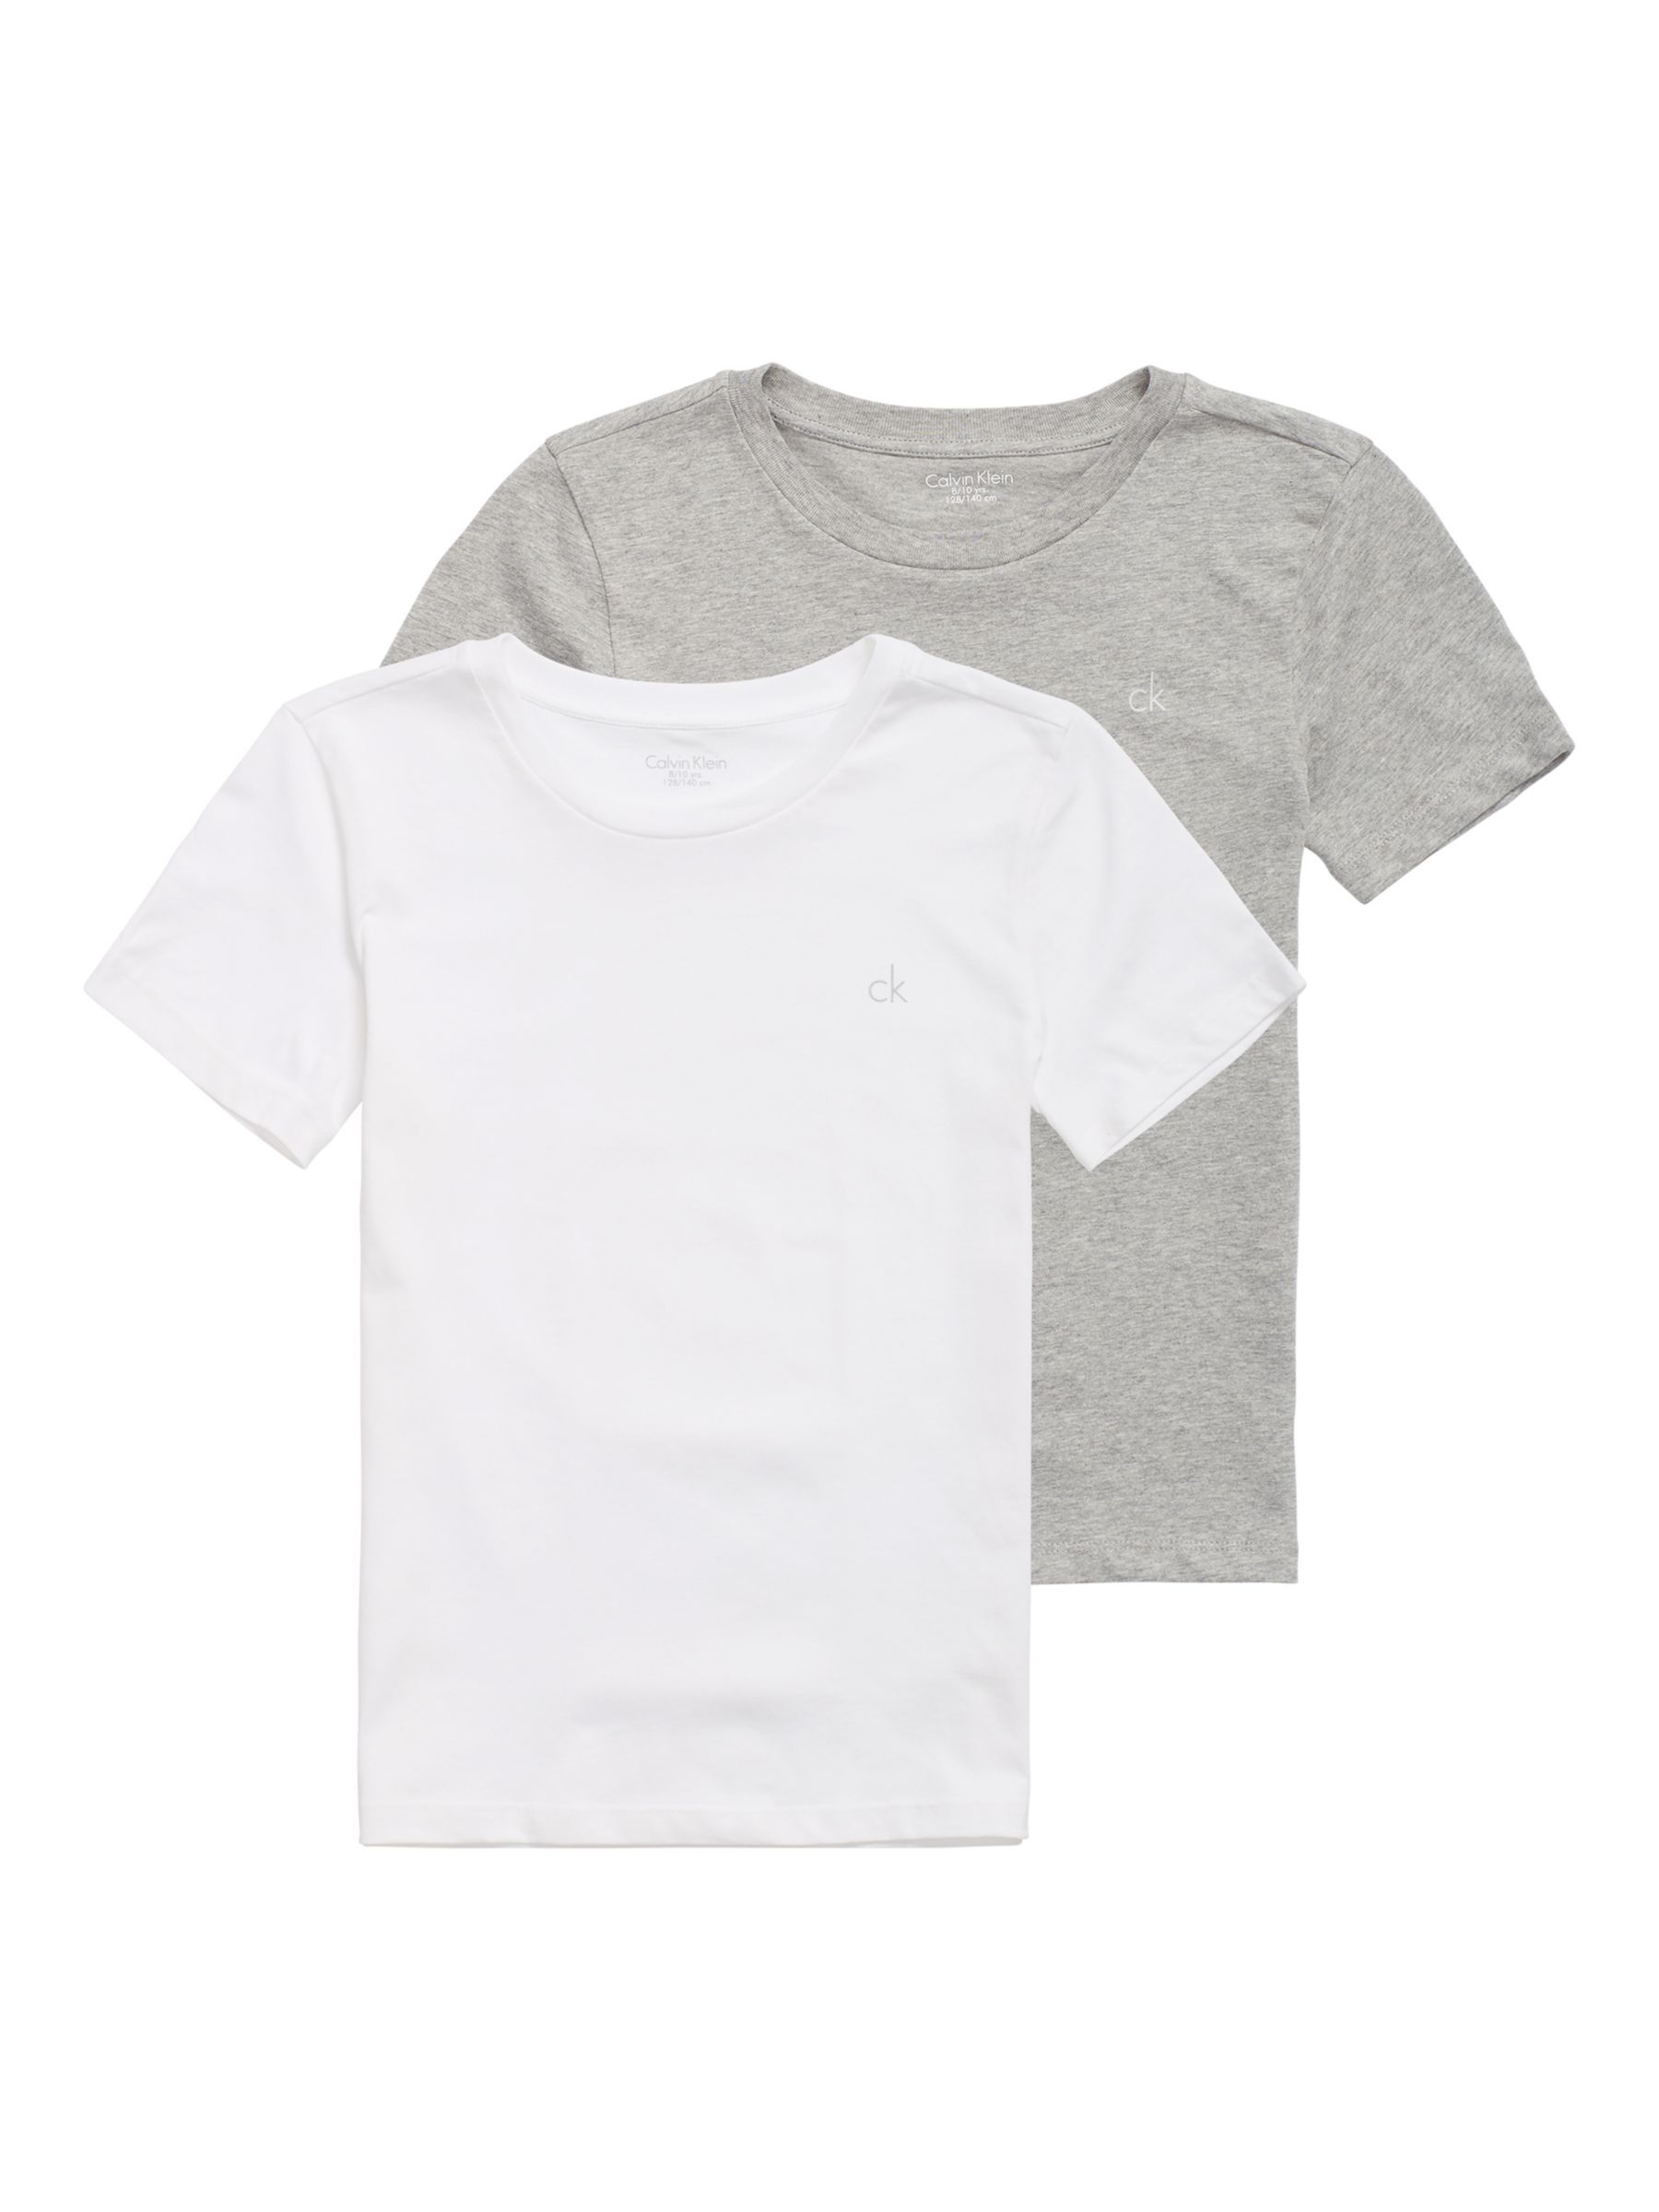 Image of Calvin Klein Boys Short Sleeve TShirts Pack of 2 WhiteRed